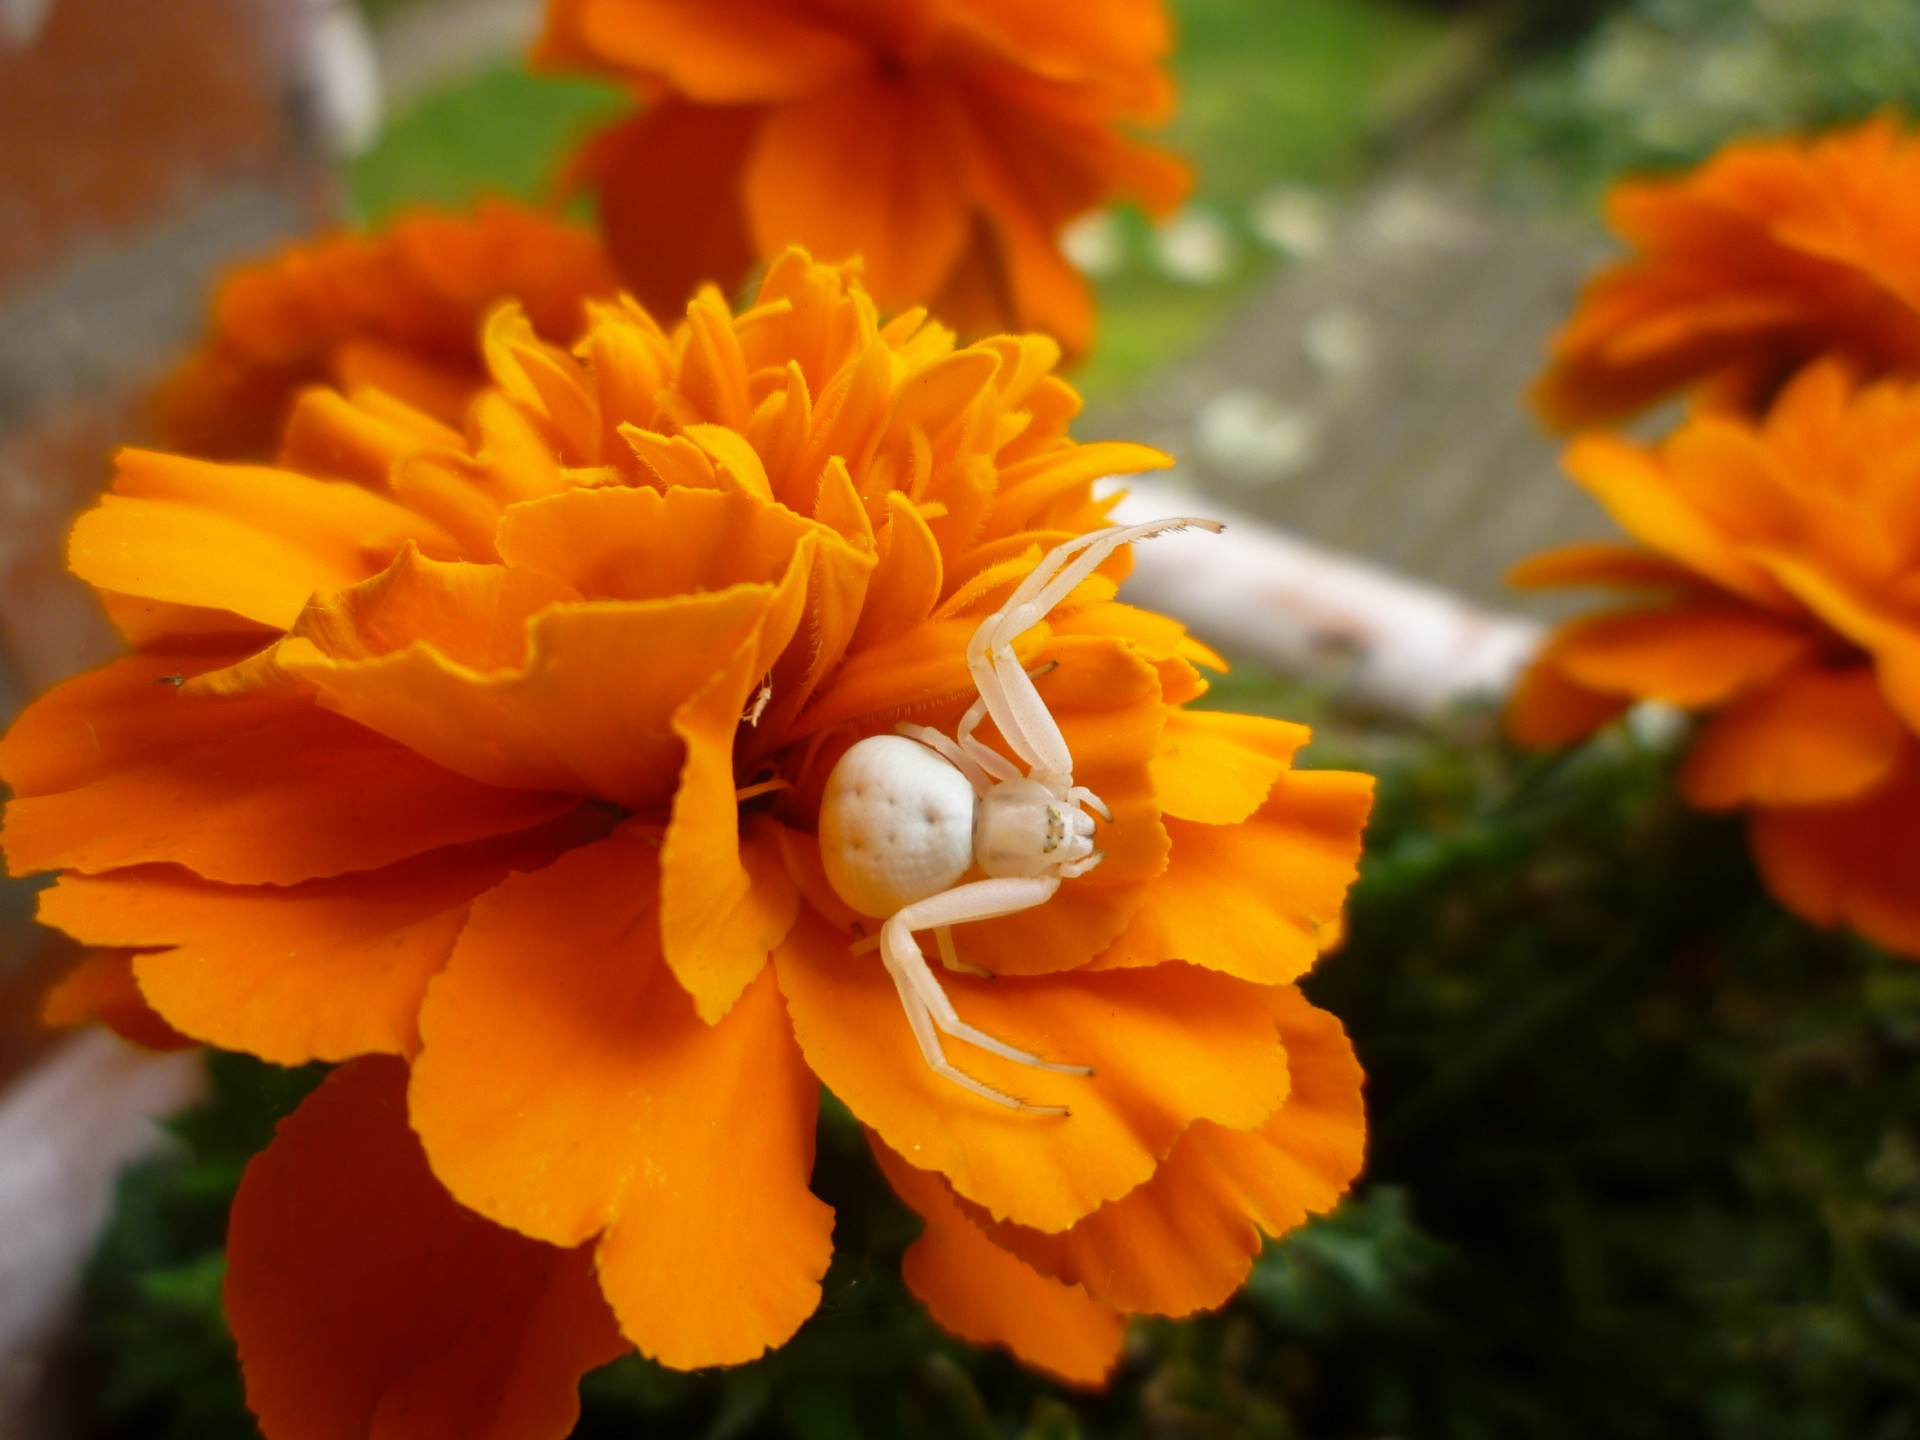 A French Marigold with a white spider hidden in its petals.